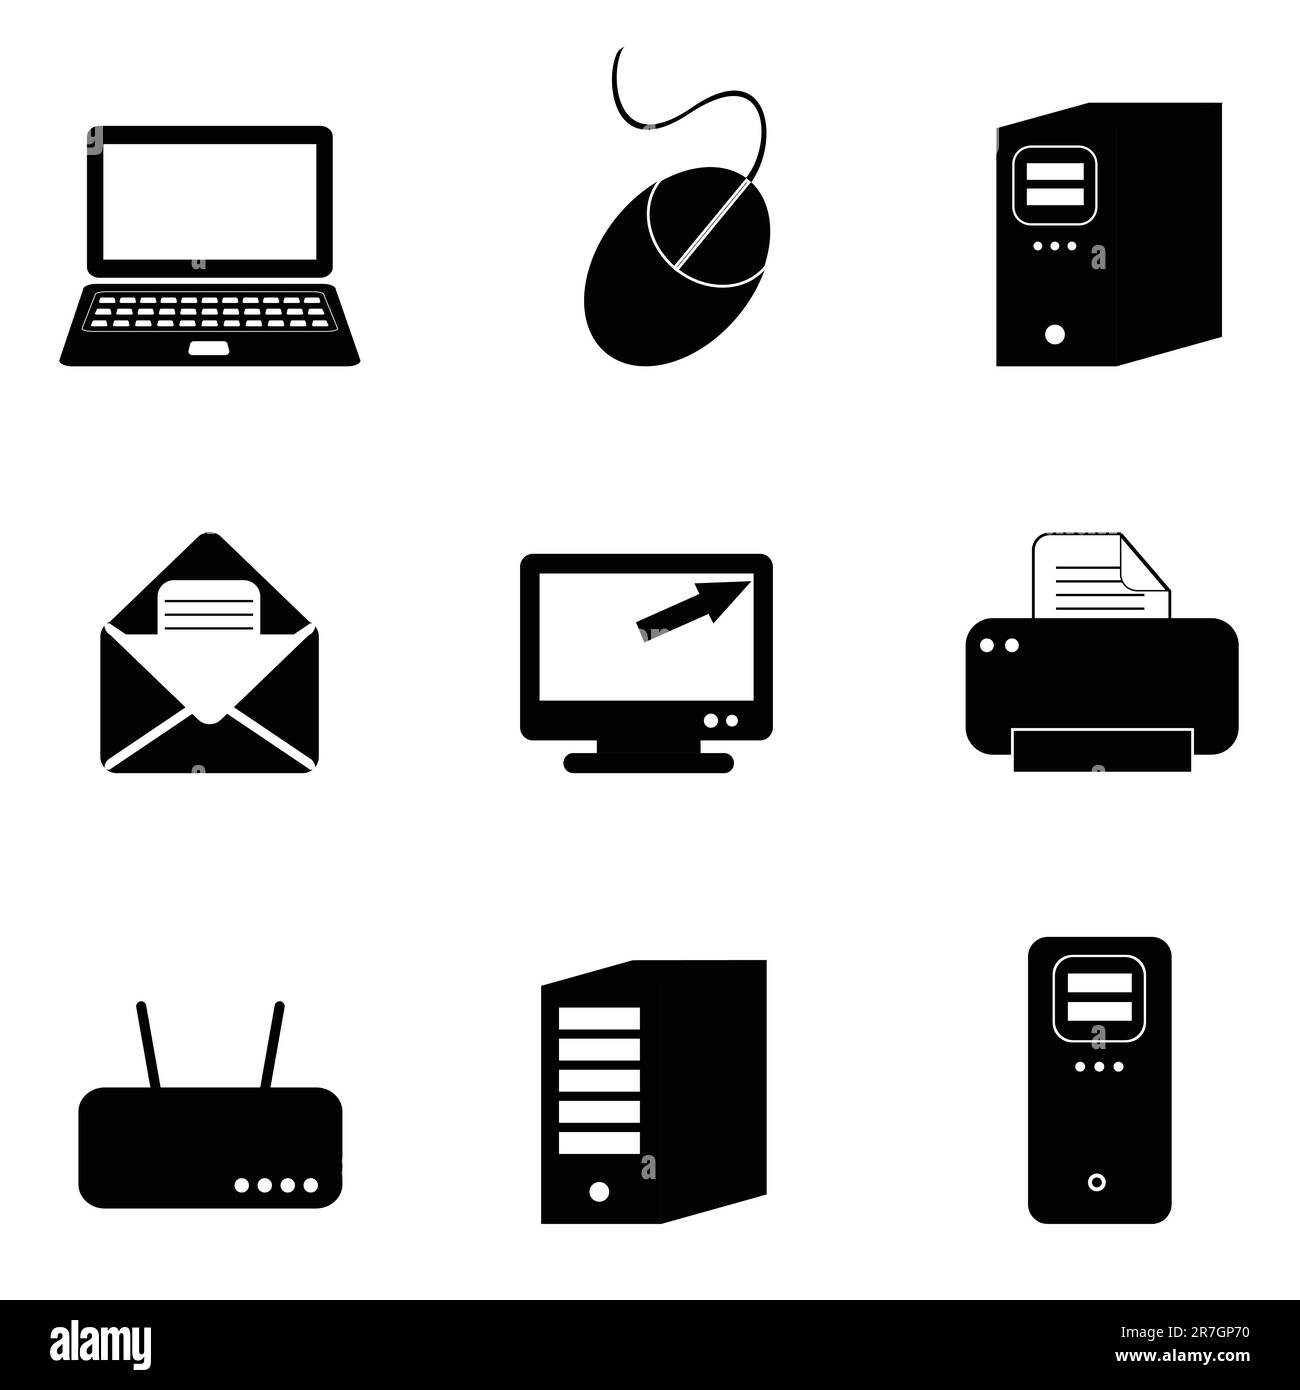 Computer and technology icon set in black Stock Vector